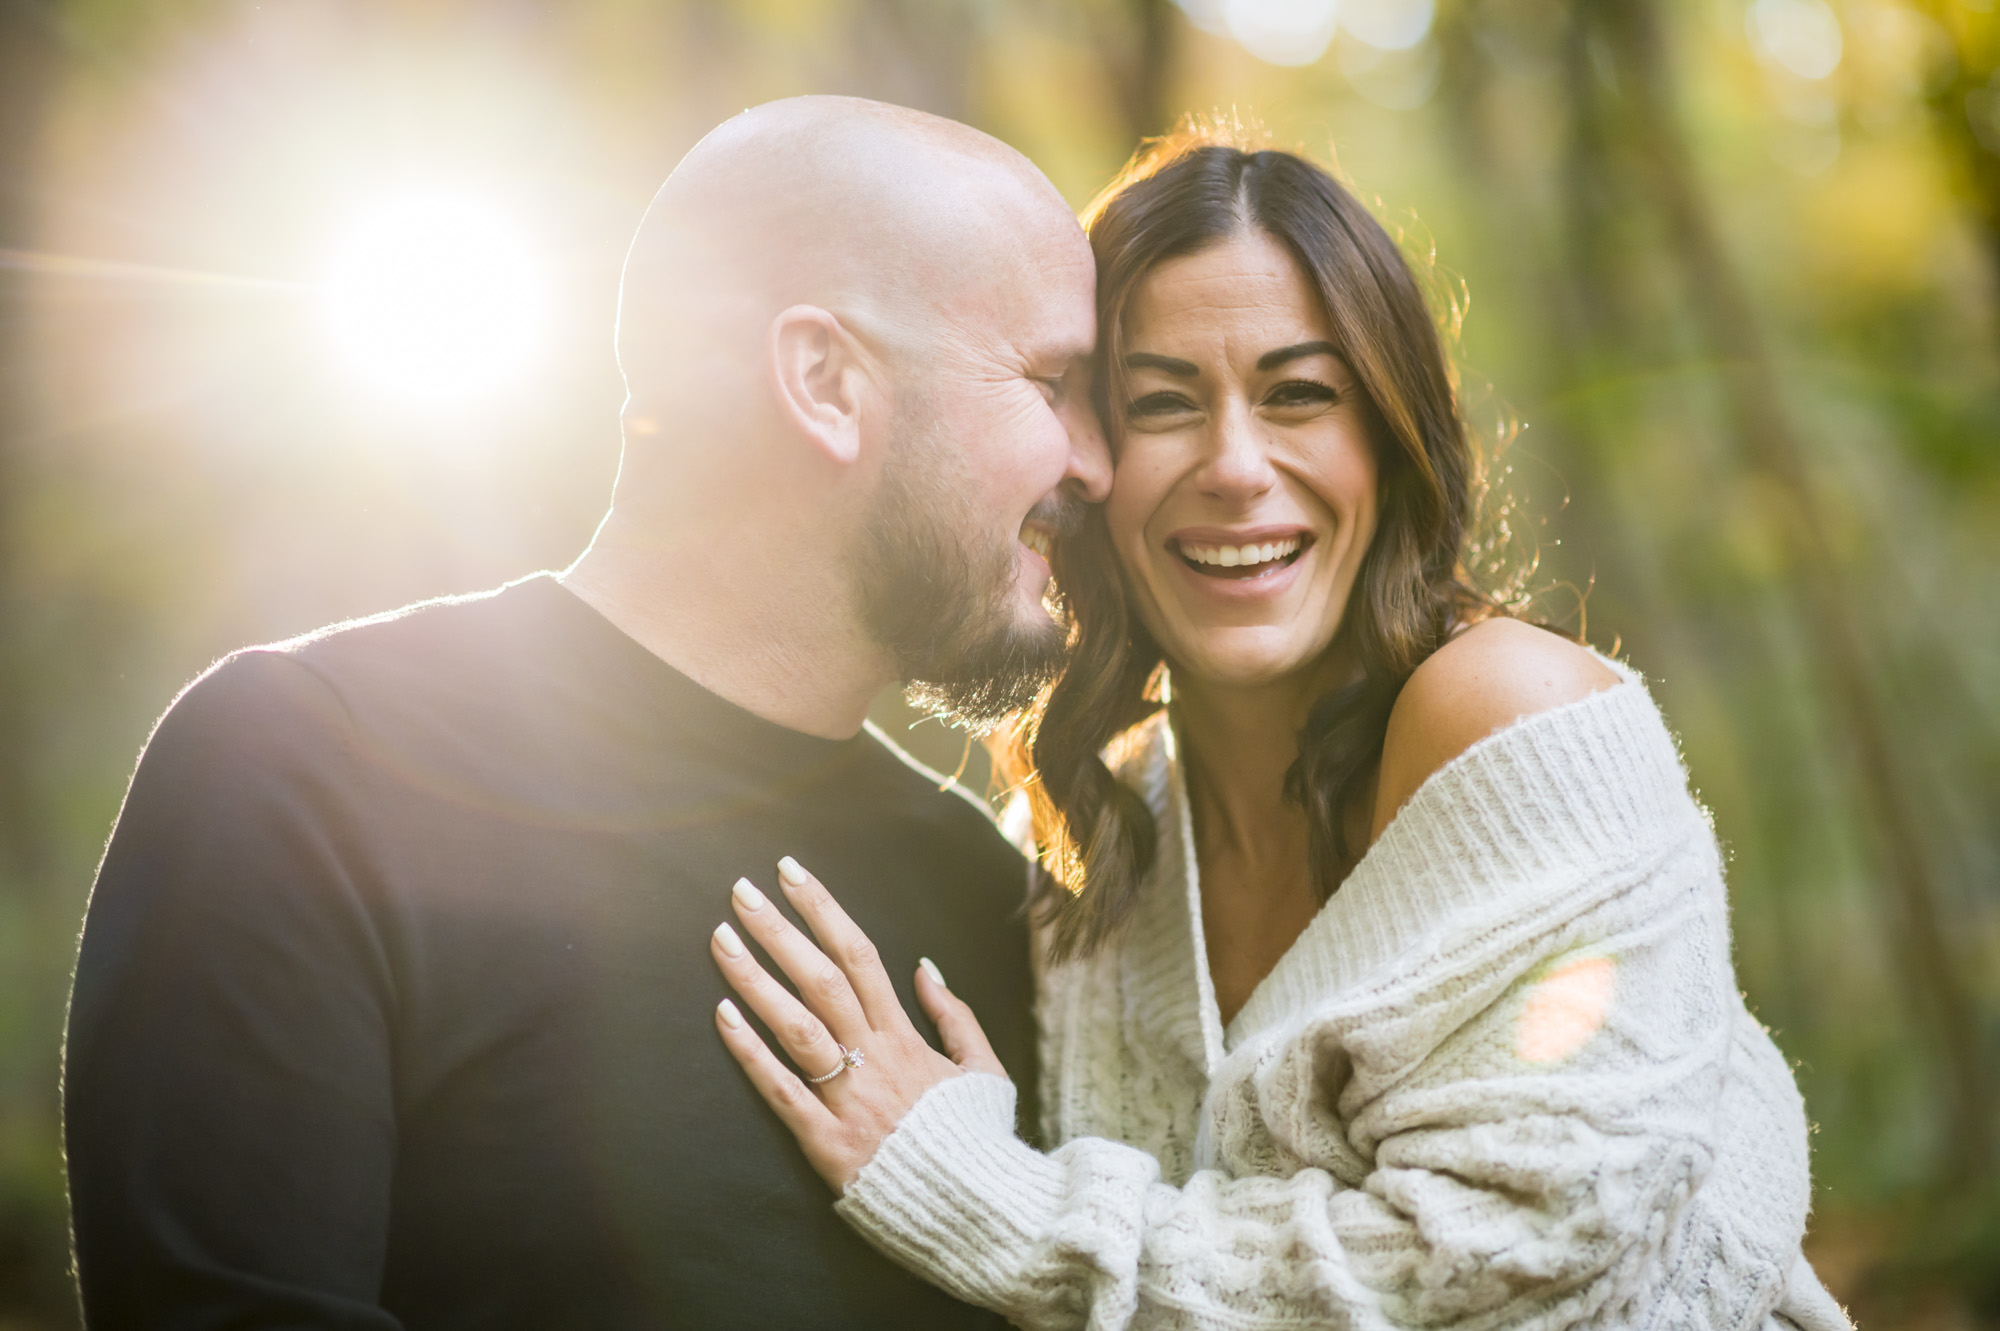 A woman laughs into he camera while her fiance nuzzles her cheek.